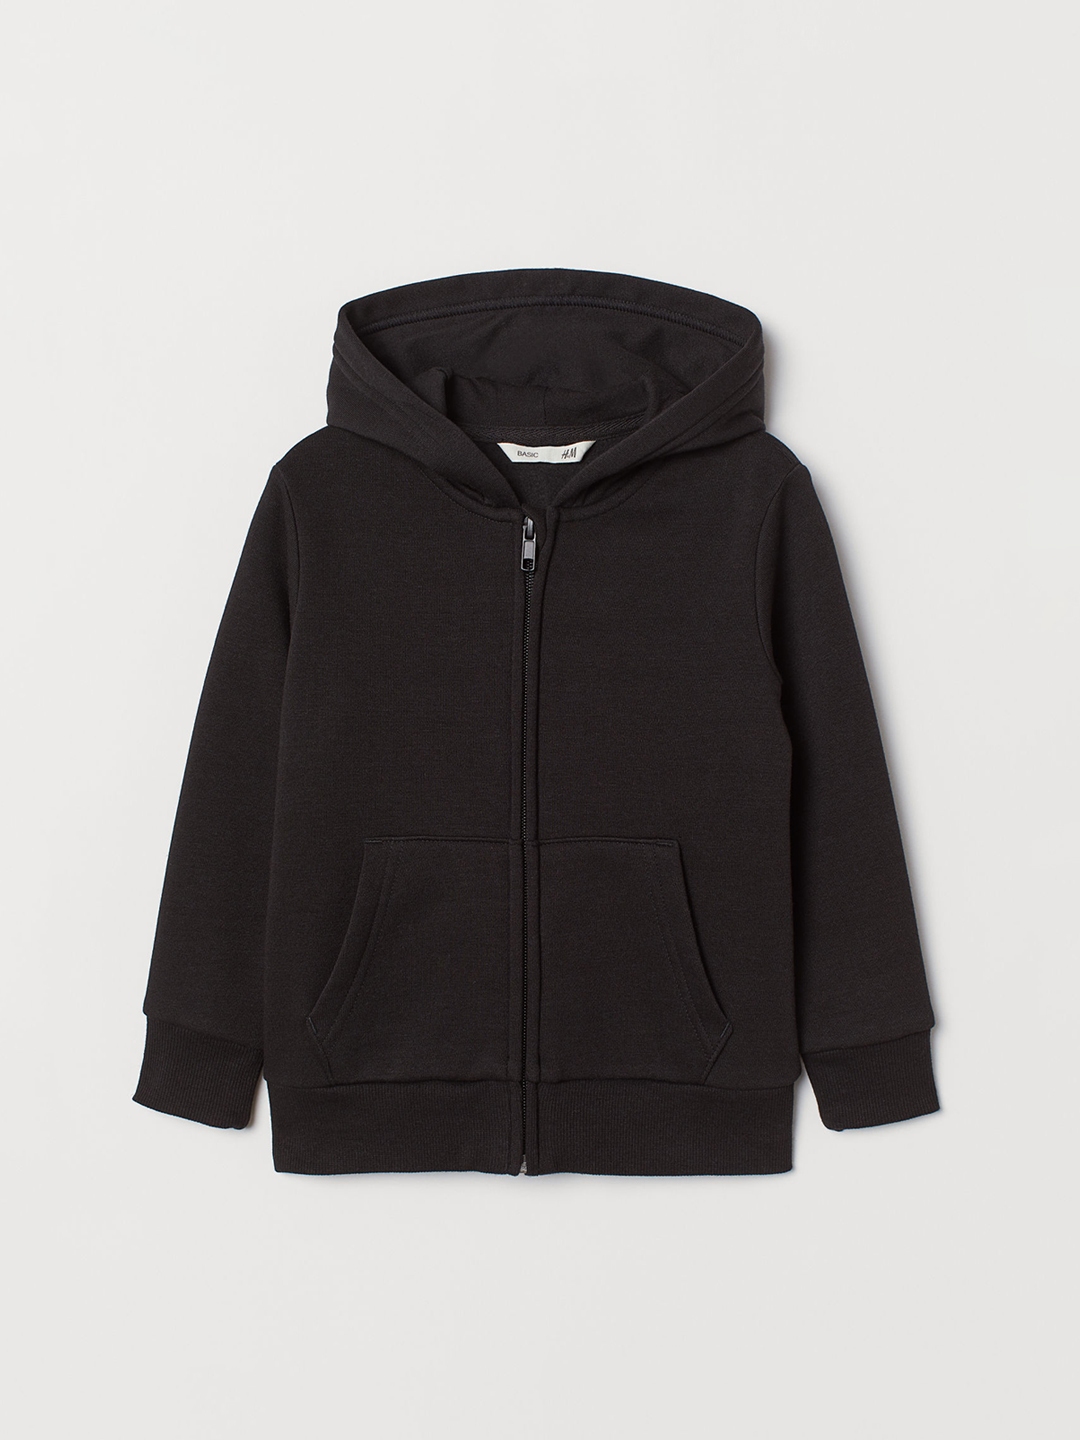 Buy H&M Boys Black Solid Hooded Sustainable Jacket - Sweatshirts for ...